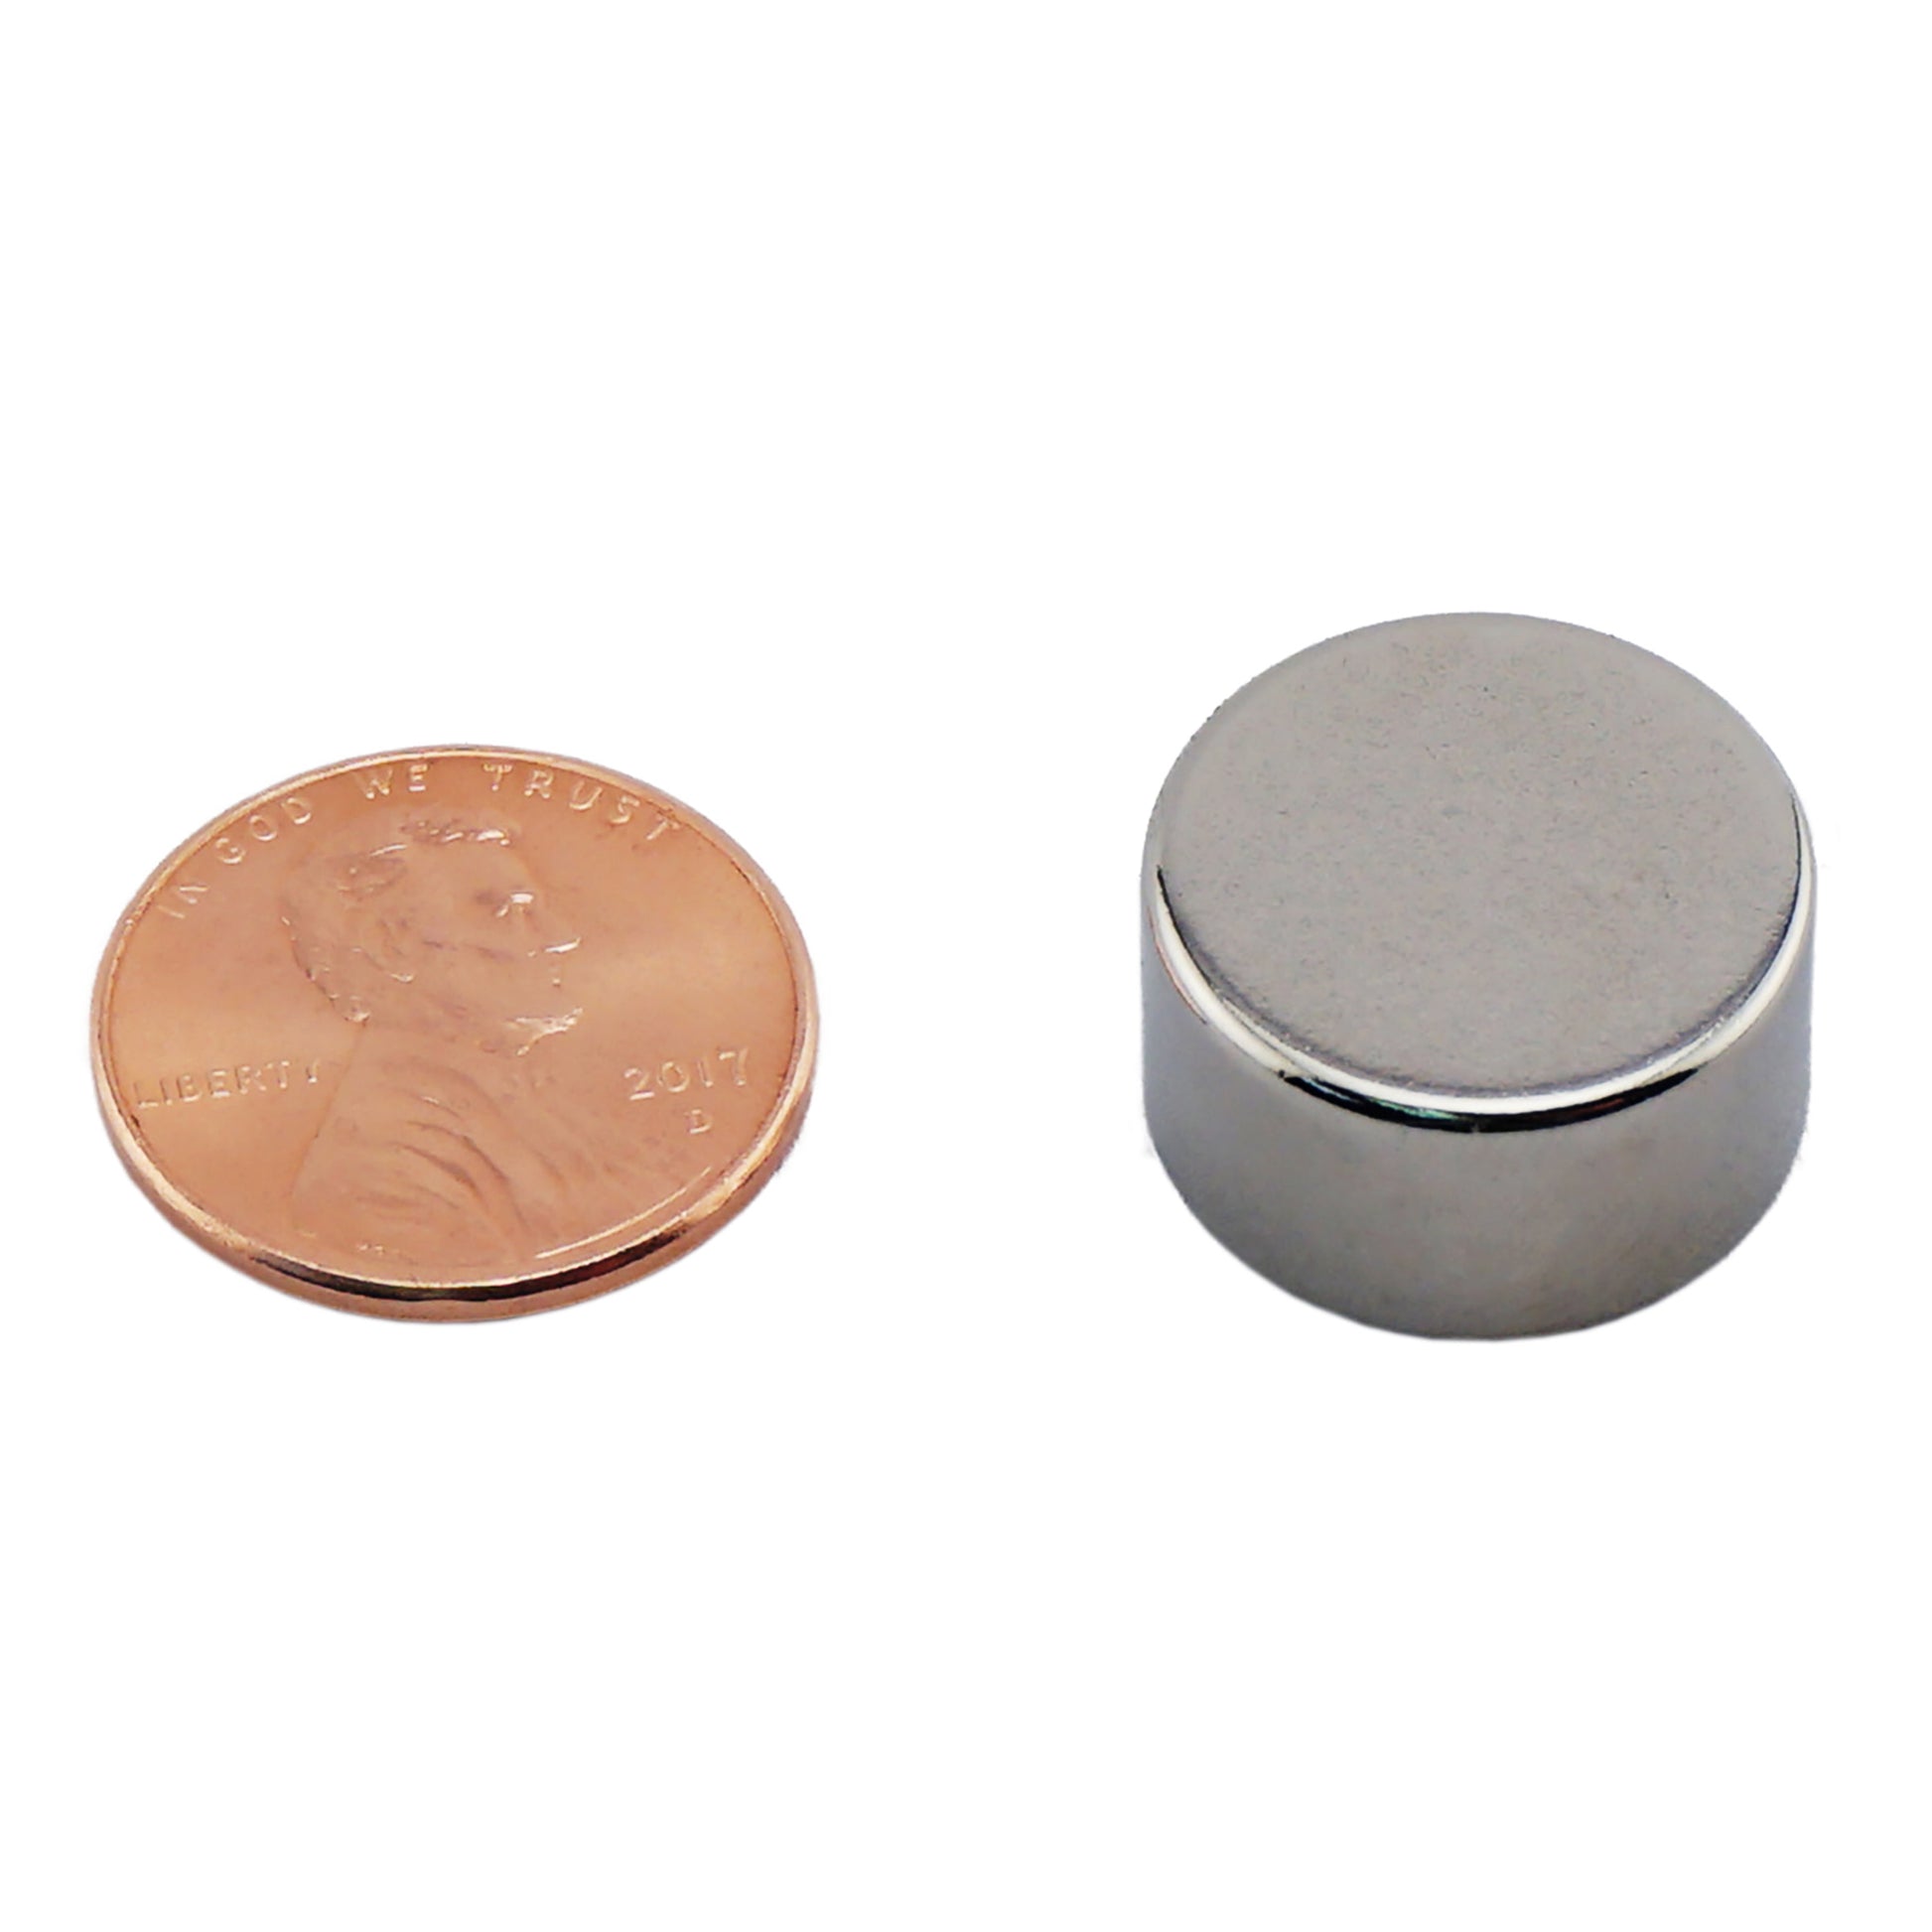 Load image into Gallery viewer, ND006801N Neodymium Disc Magnet - Compared to Penny for Size Reference